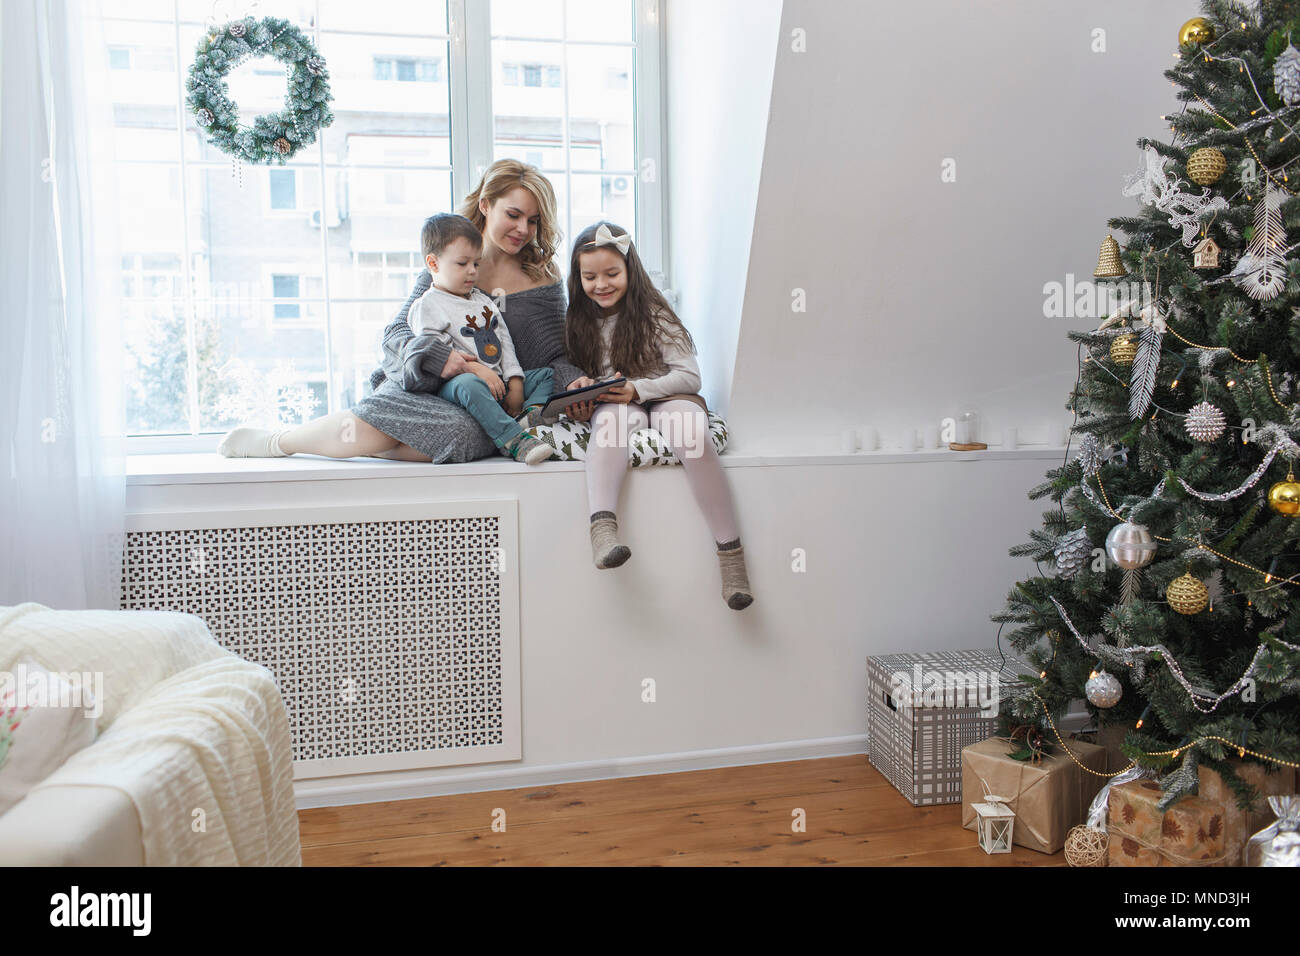 Woman sitting with children on window sill at home during Christmas Stock Photo